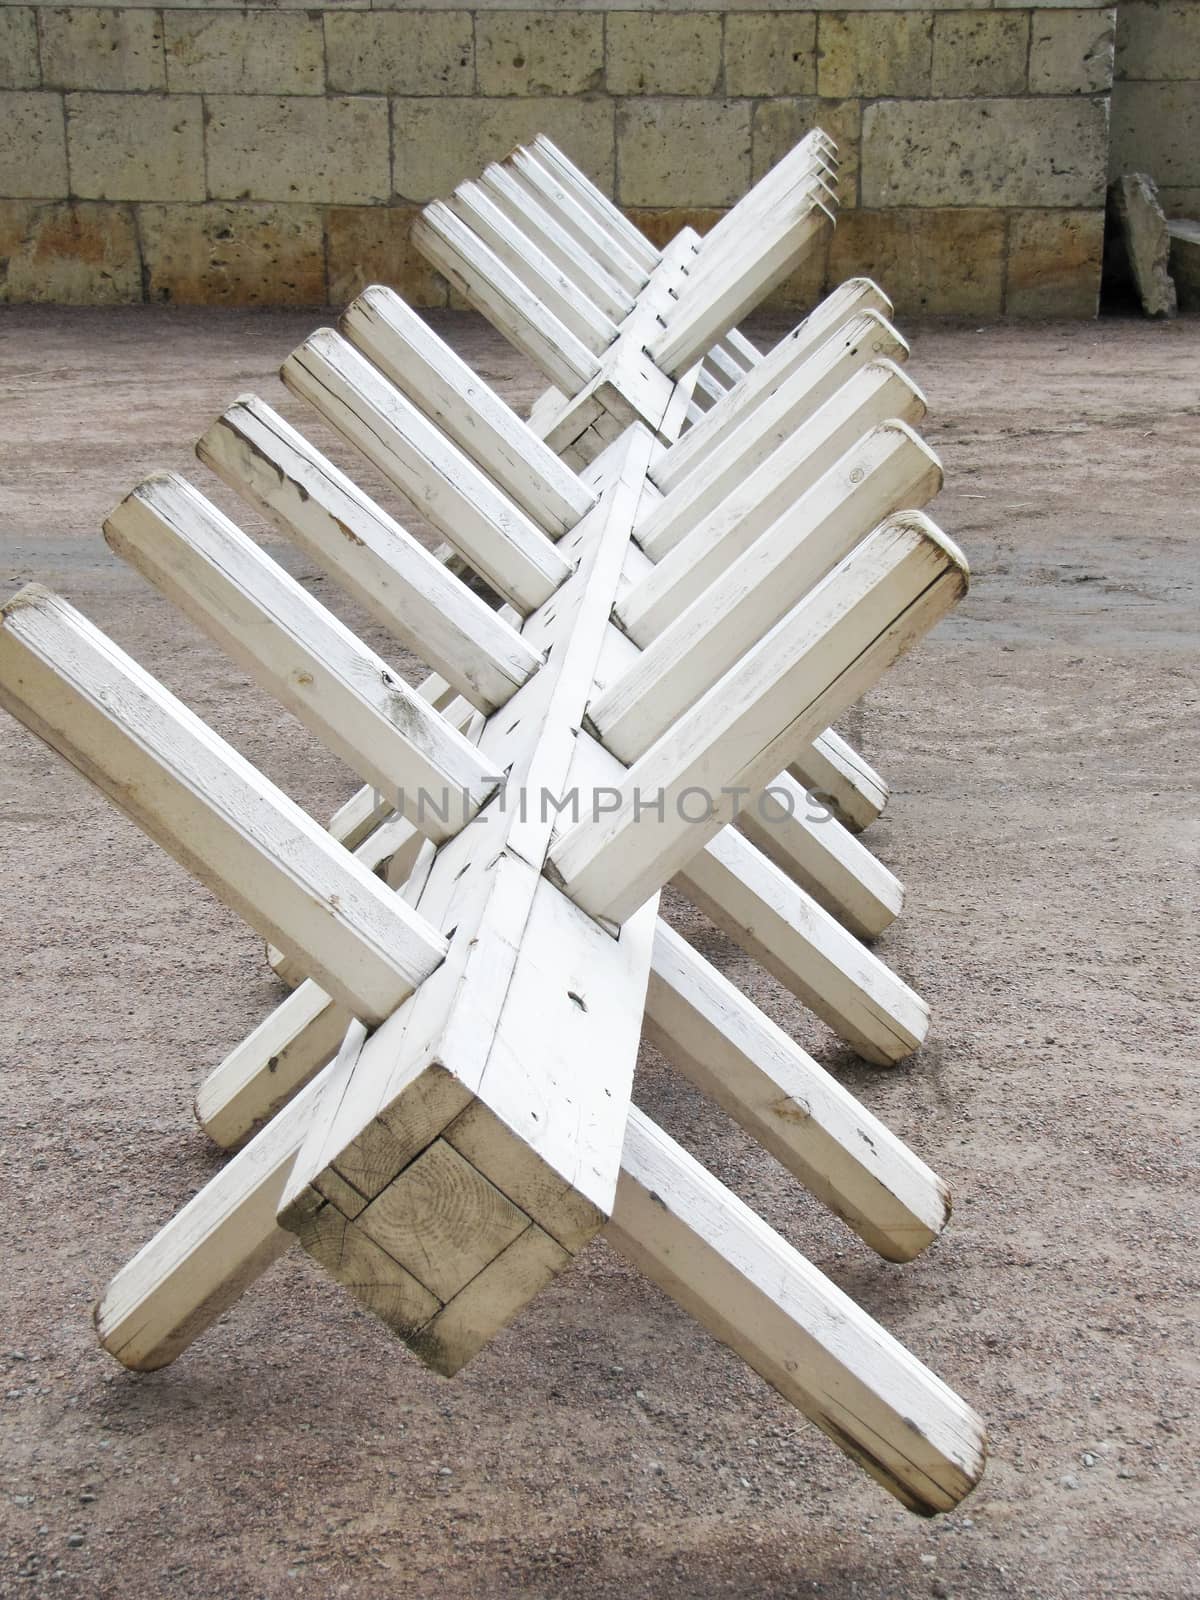 light fortification slingshot made of wood painted in white colour on stone wall background